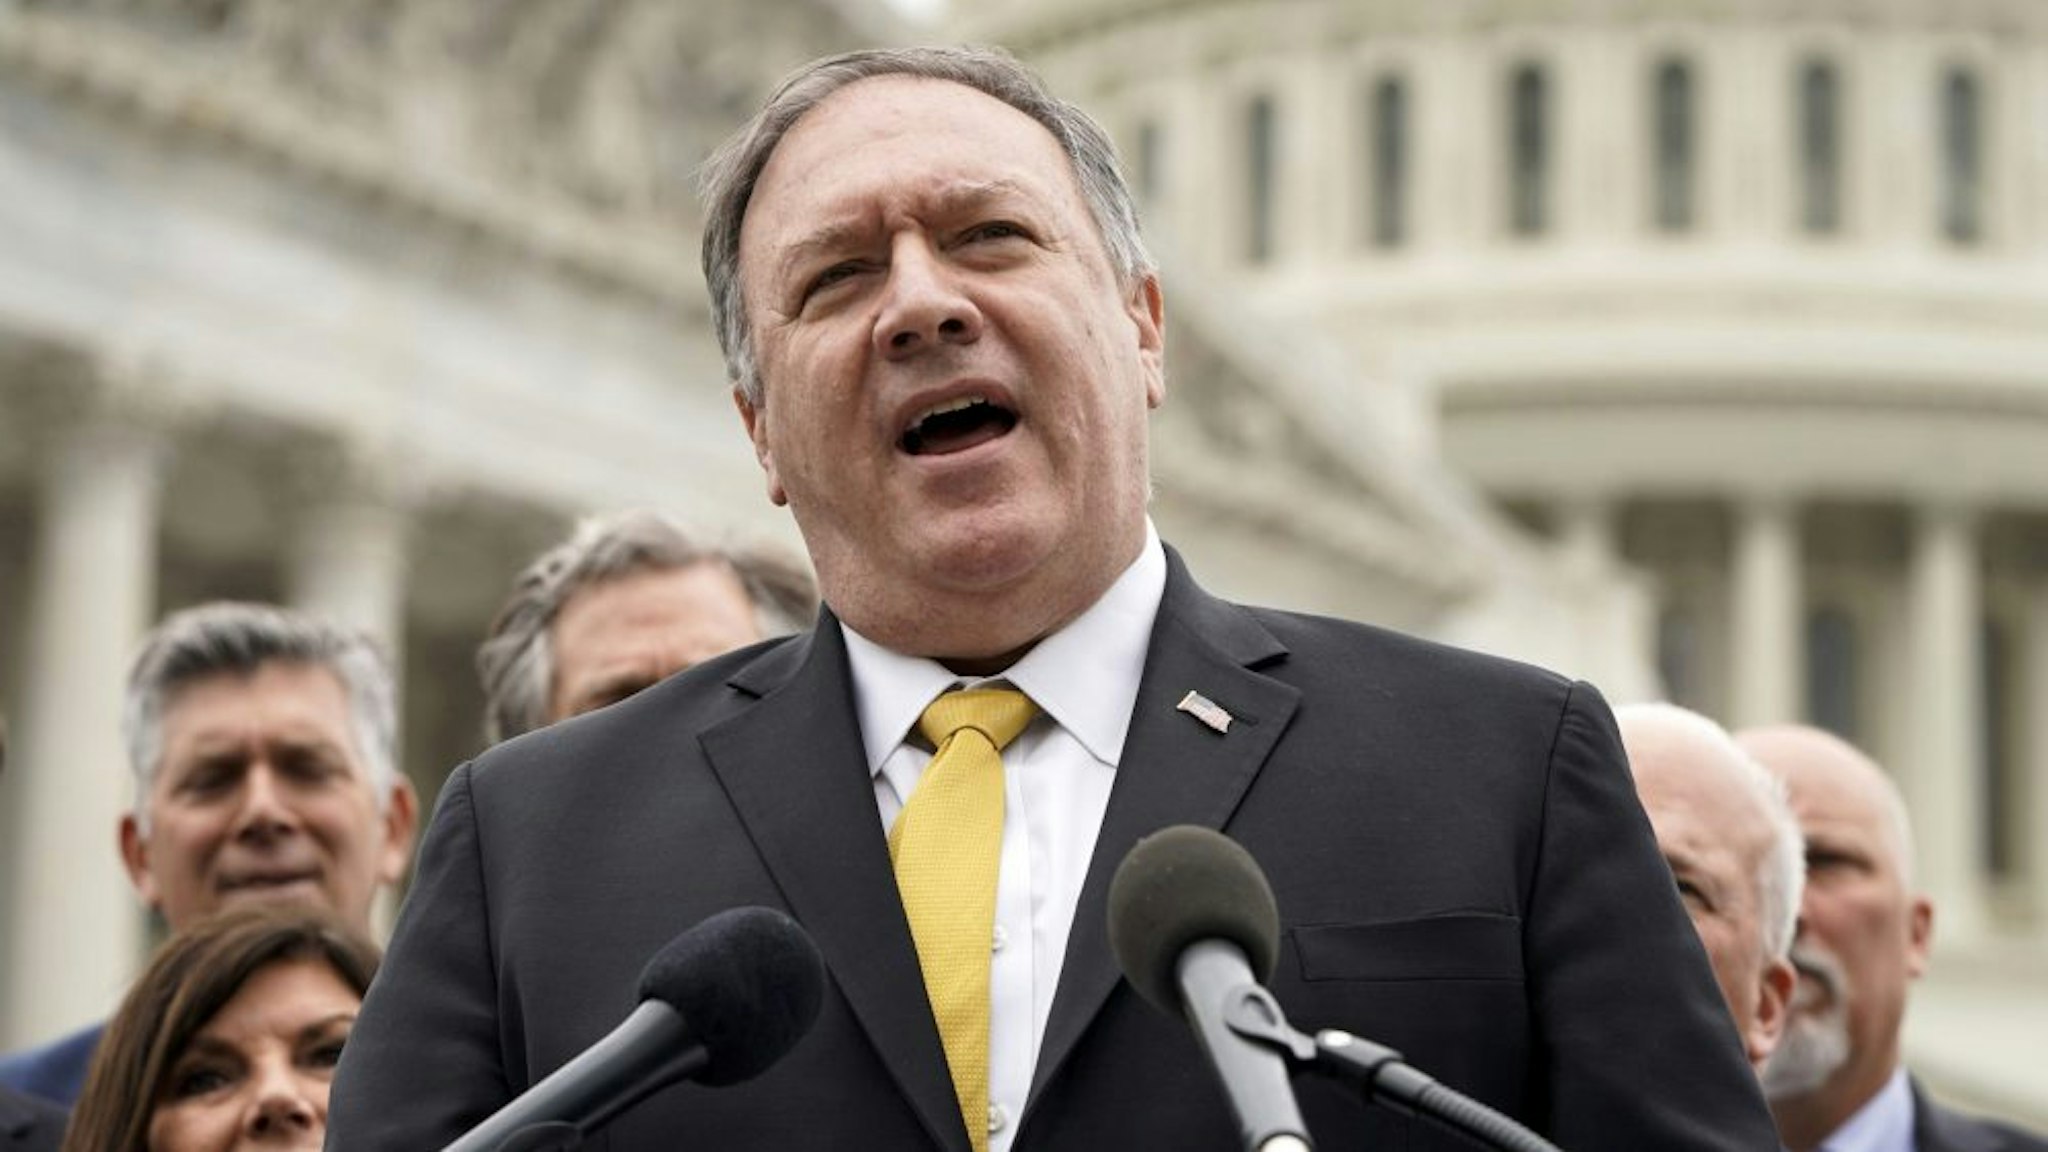 WASHINGTON, DC - APRIL 21: Former Secretary of State Mike Pompeo speaks to the media with members of the Republican Study Committee about Iran on April 21, 2021 in Washington, DC. The group has proposed legislation that would expand sanctions on Iran and aim to prevent the U.S. reentering the Iran deal.